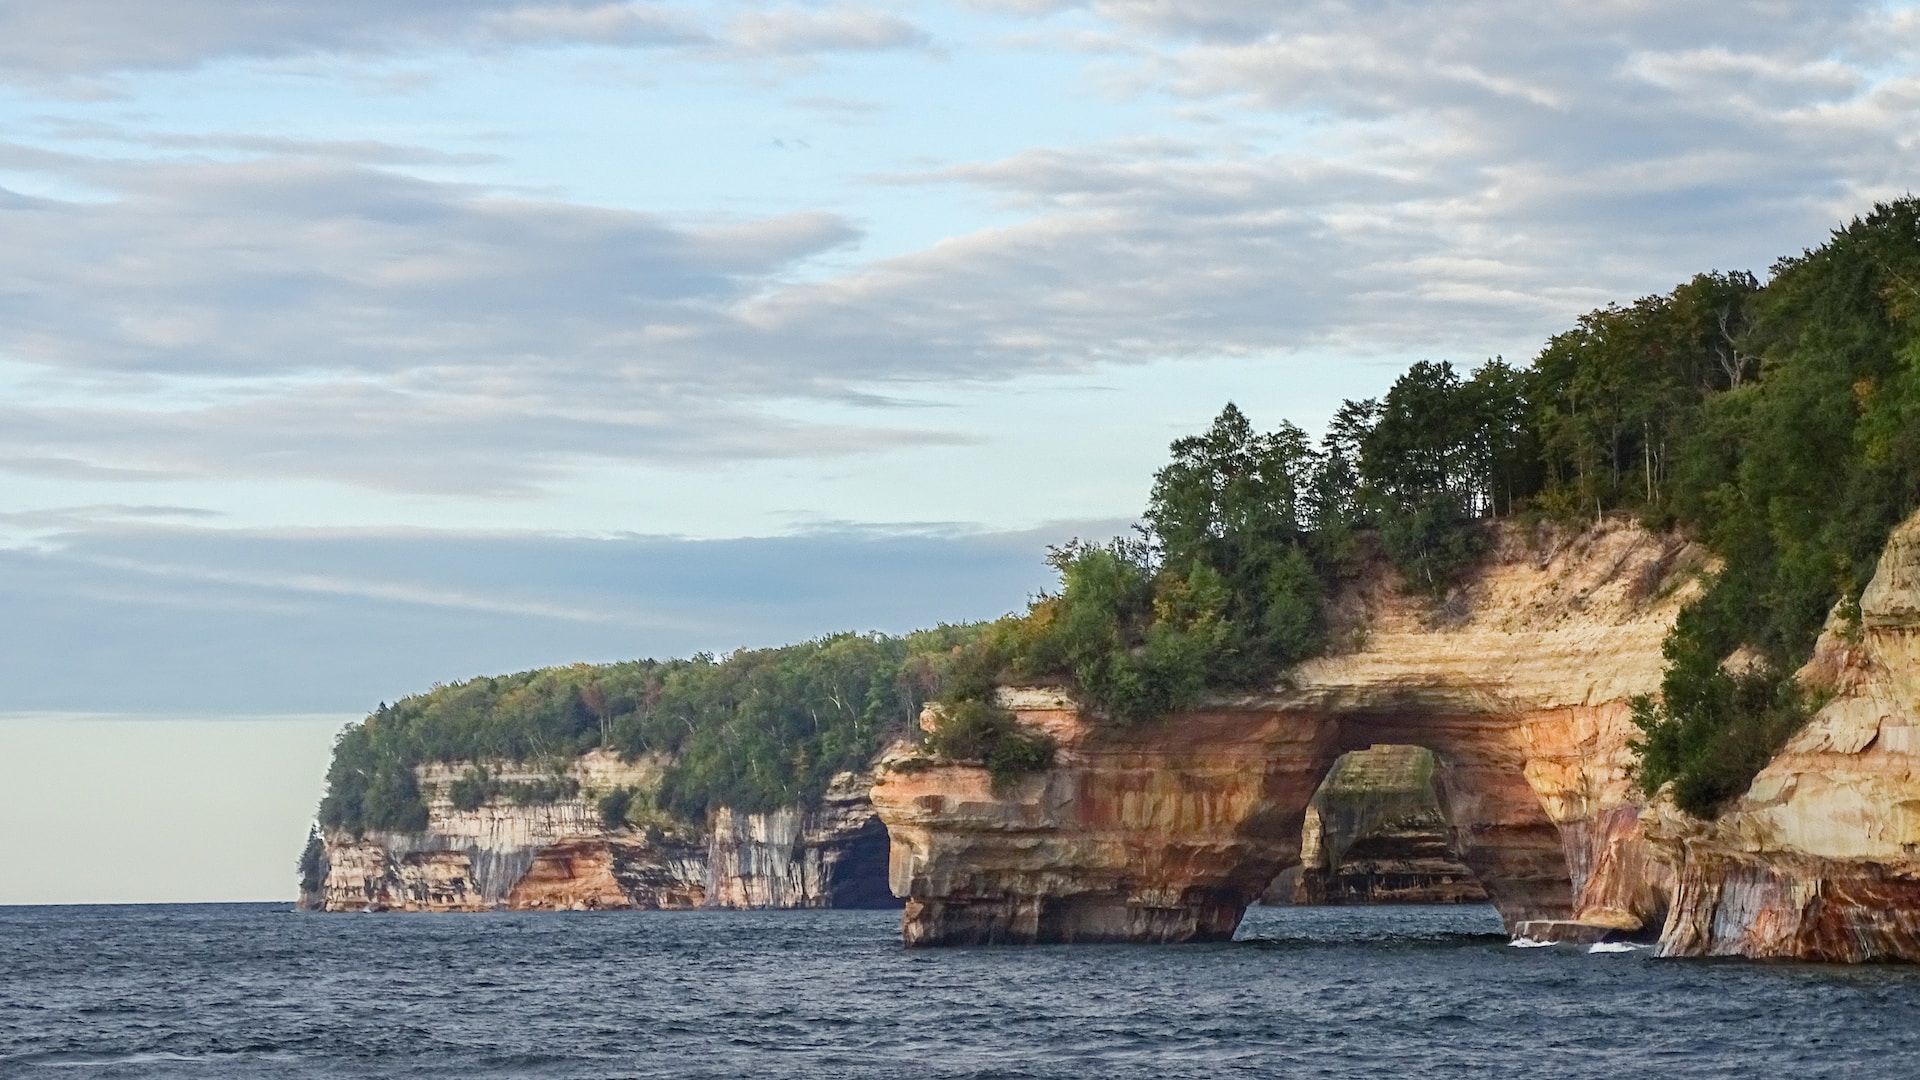 View of Pictured Rocks from a boat in Lake Superior.